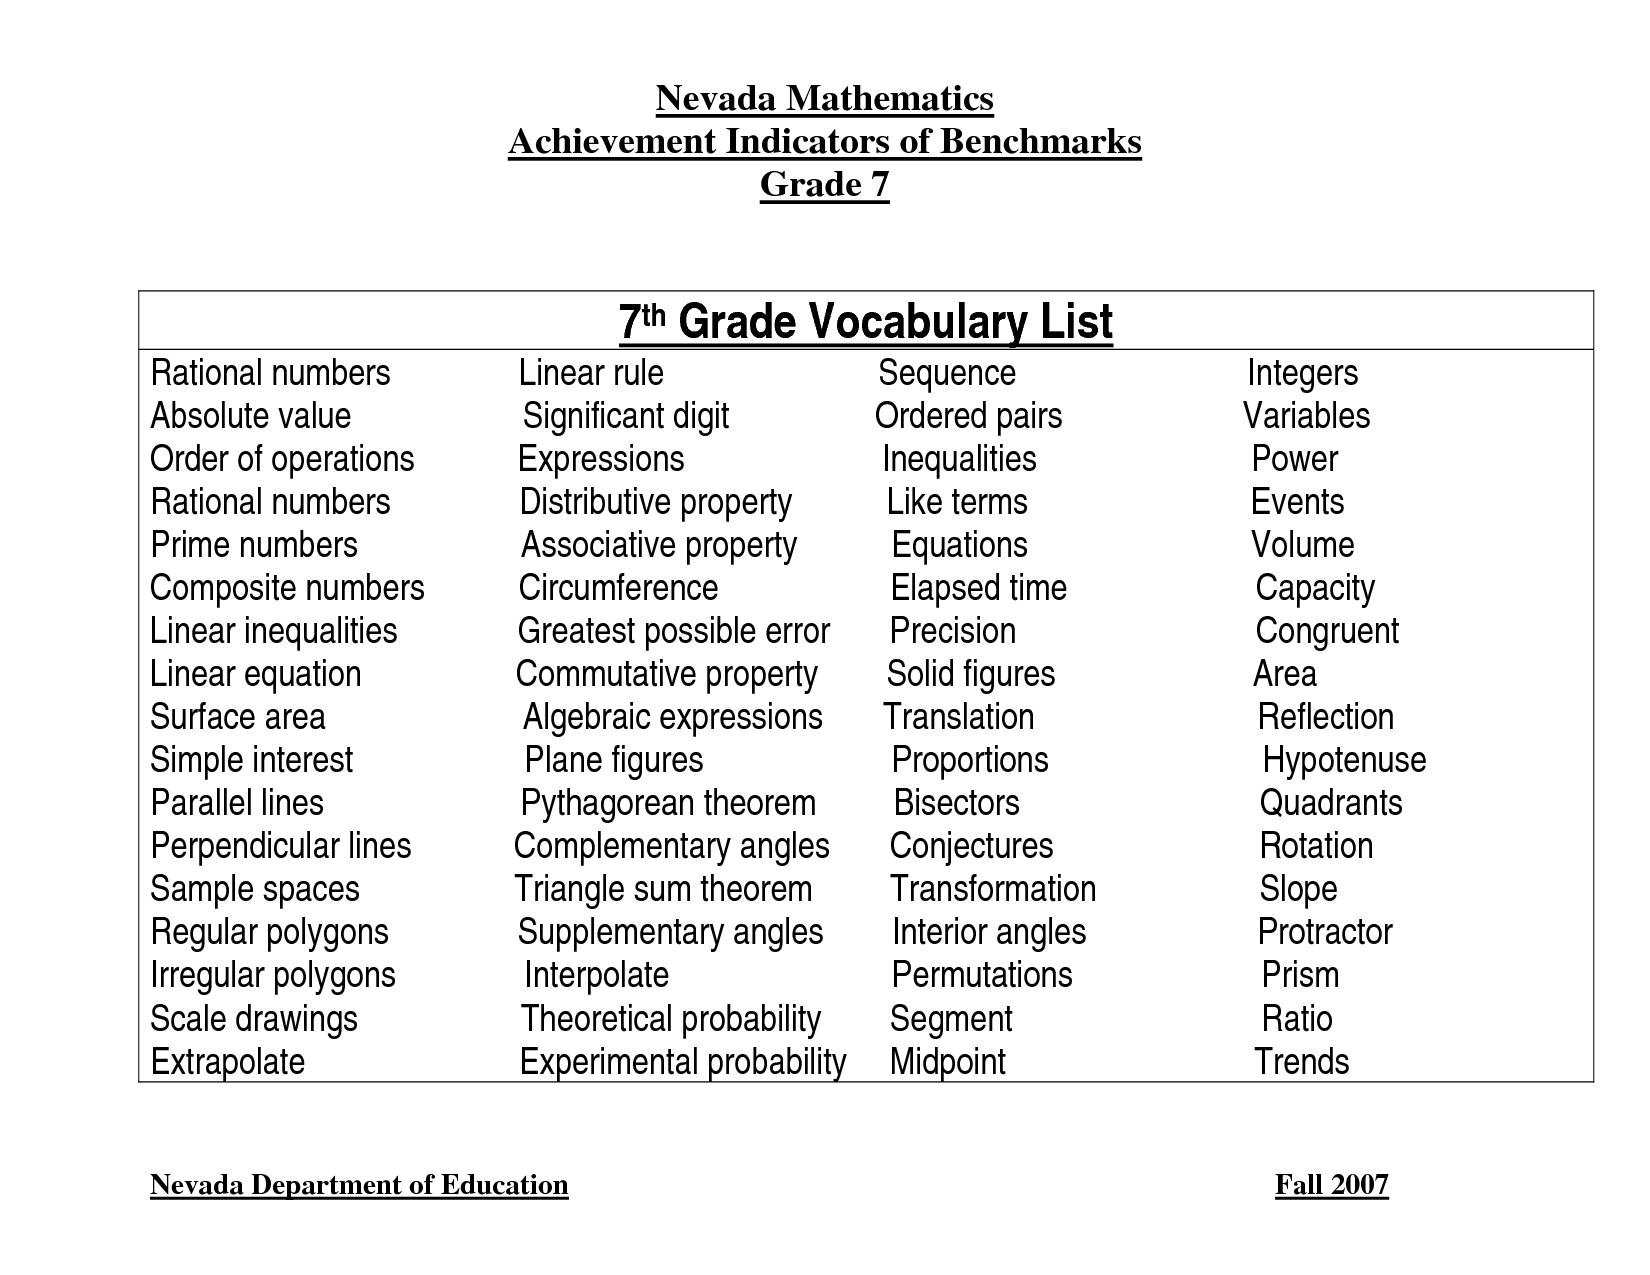 12 Best Images of 5th Grade Science Vocabulary Worksheets - 5th Grade